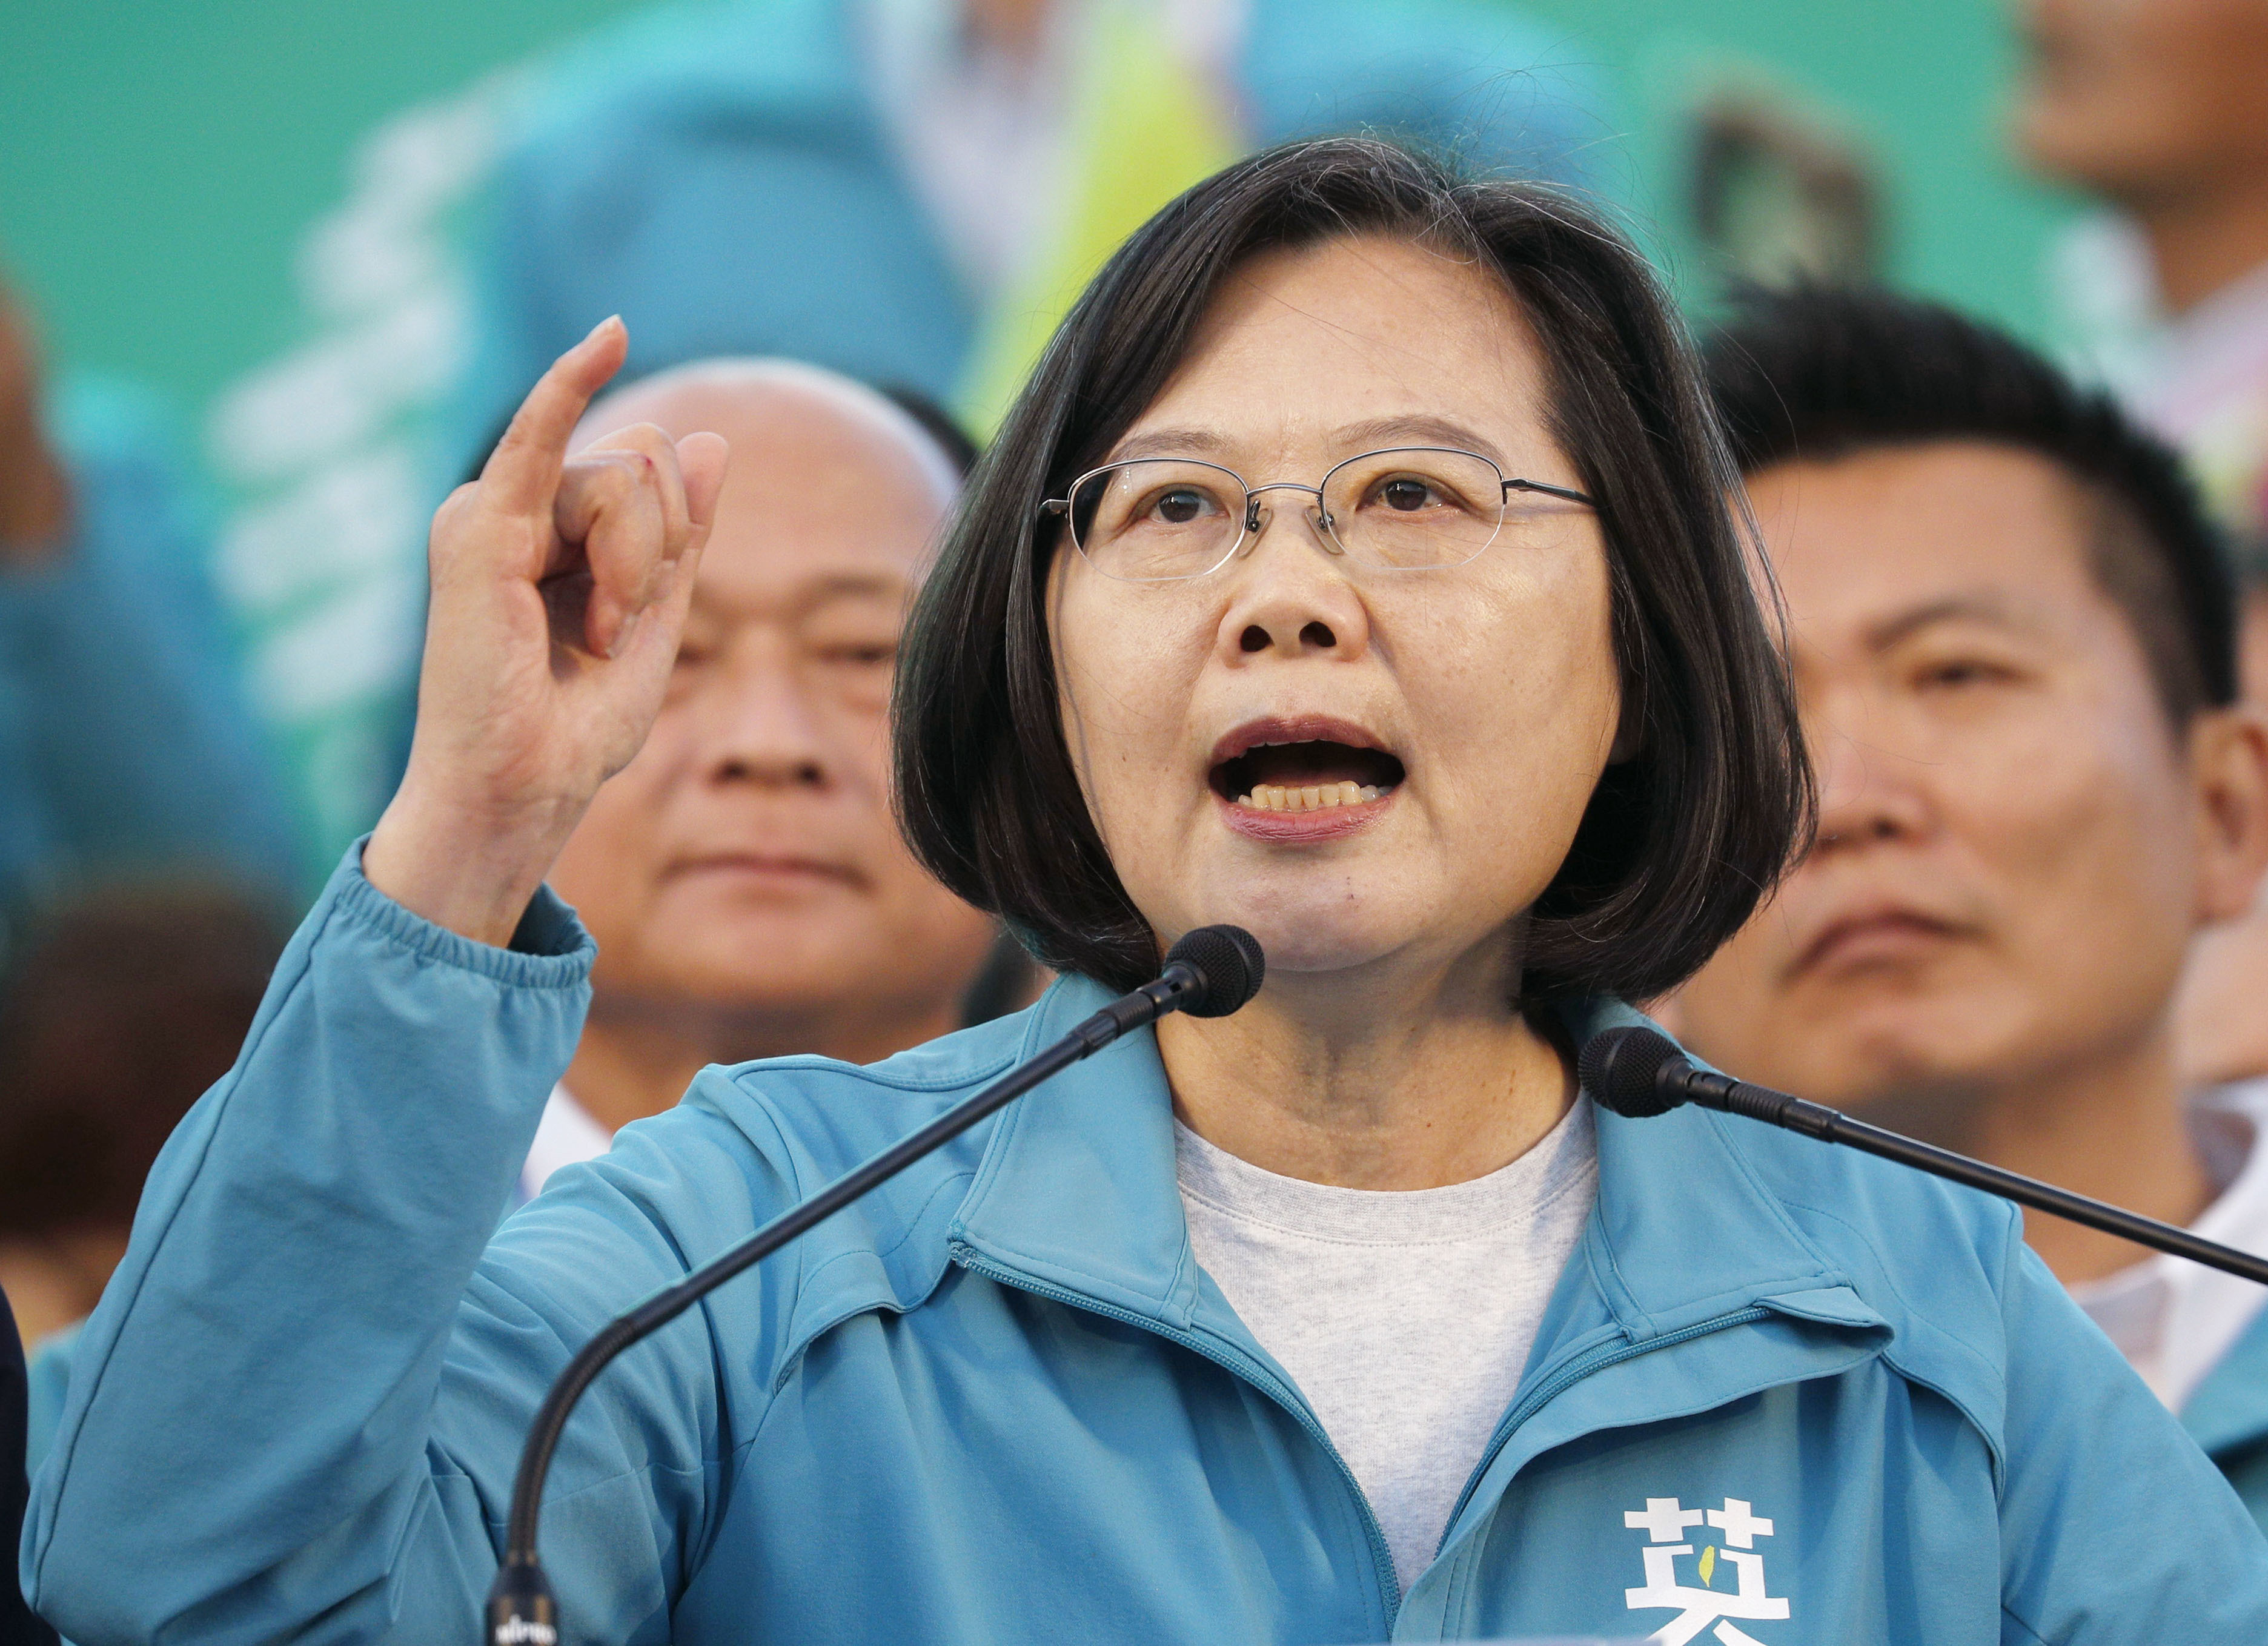 Taiwanese President Tsai Ing-wen of the Democratic Progressive Party attends a campaign rally in Tainan on Jan. 5, 2020. (Kyodo News/AP)